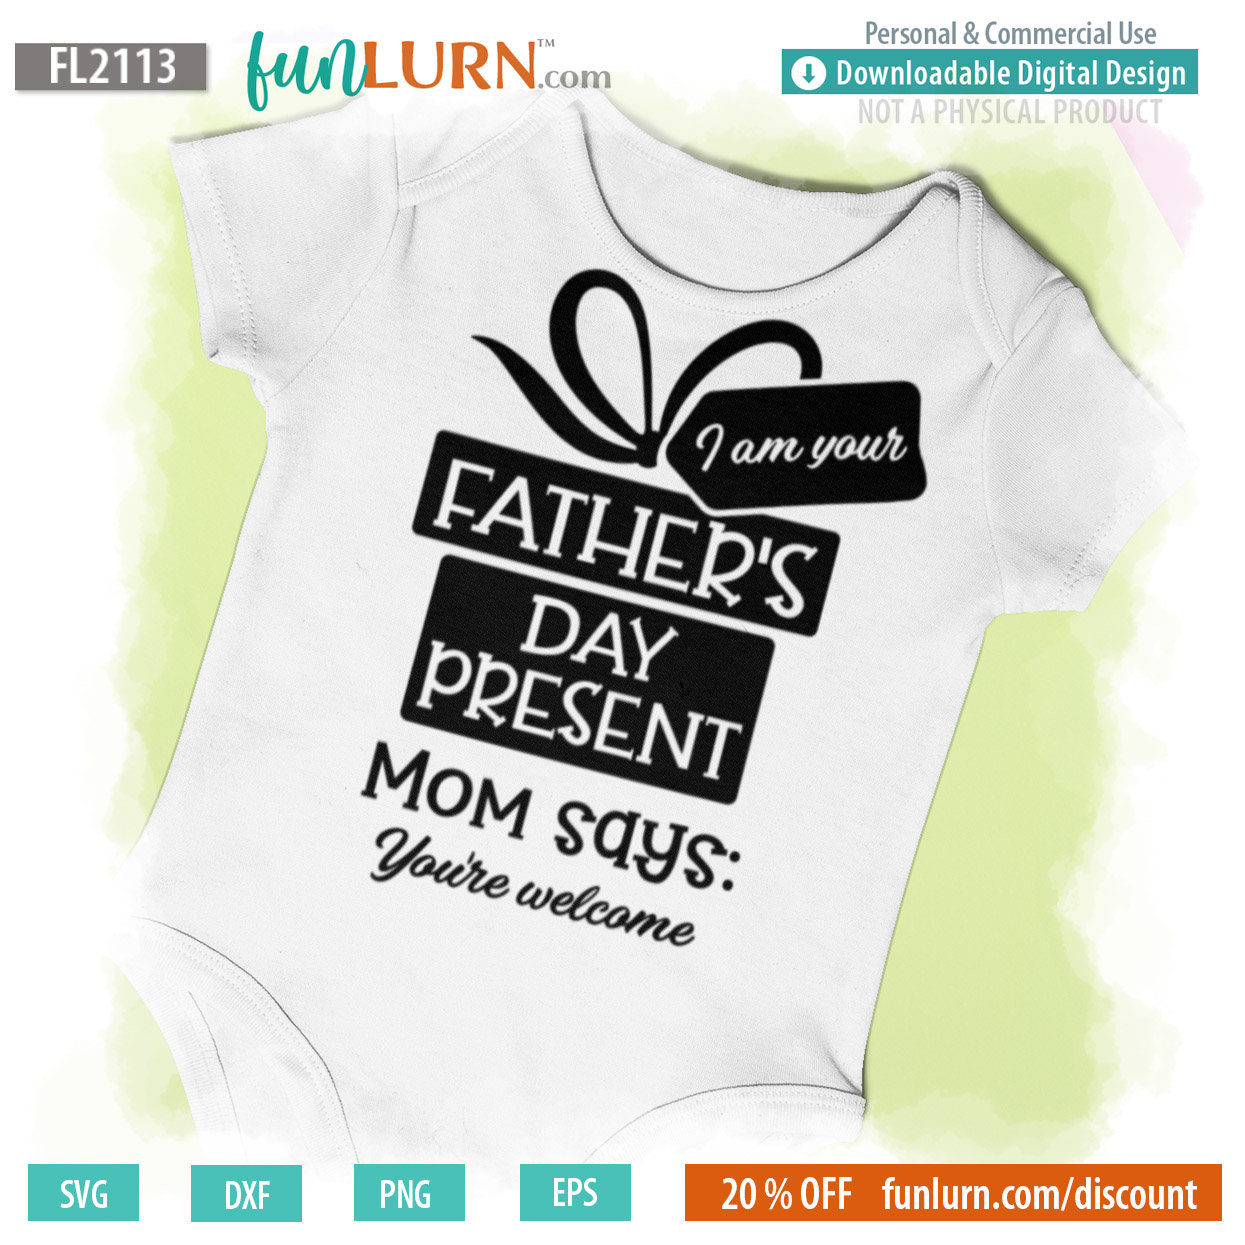 Download I am Your Father's Day present mom says you're welcome - FunLurn